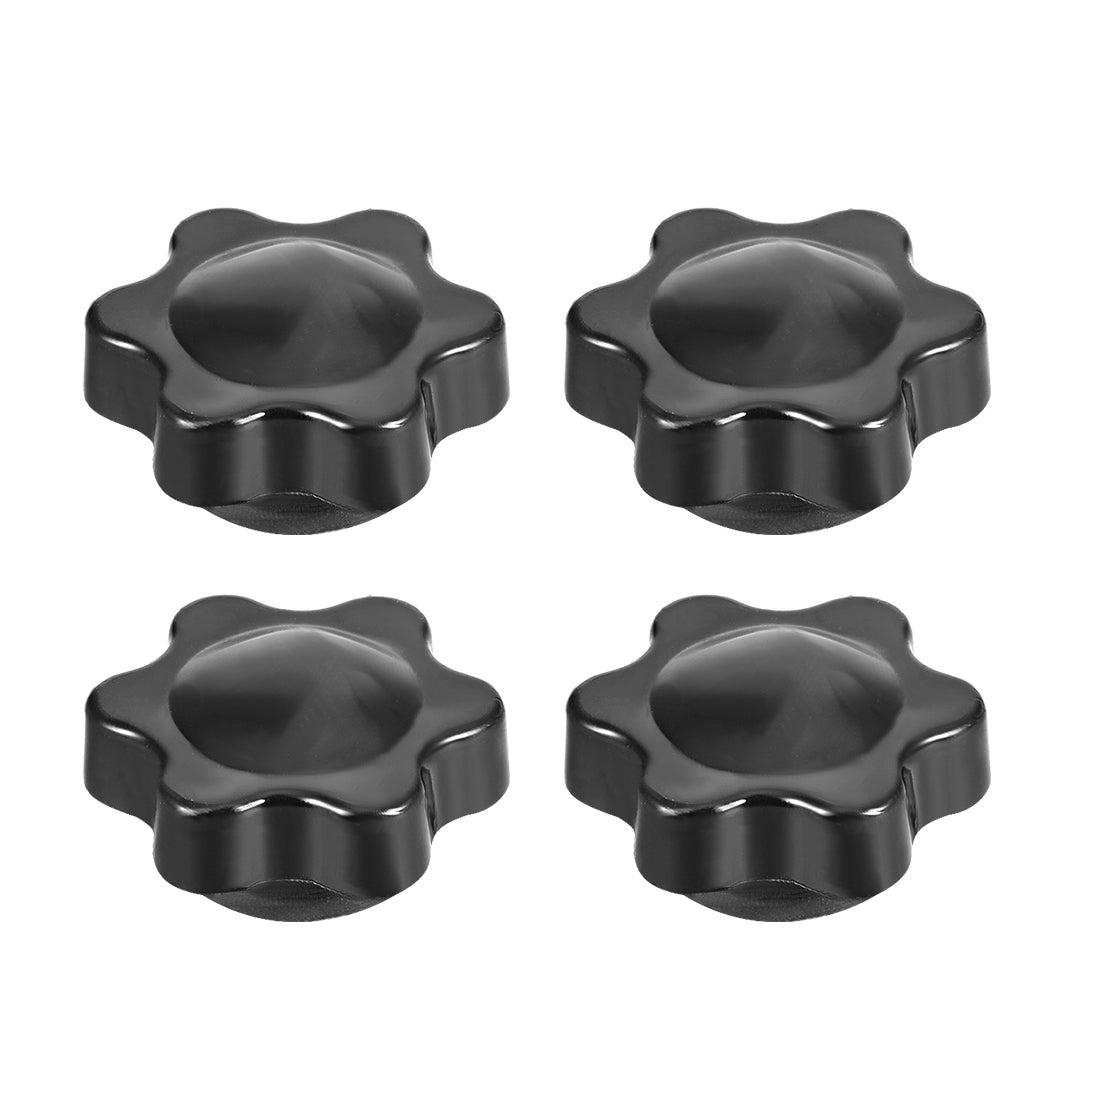 uxcell Uxcell Clamping Handle Gripandles Screw Knobs Handgrips Star Knob Female Thread 4pcs